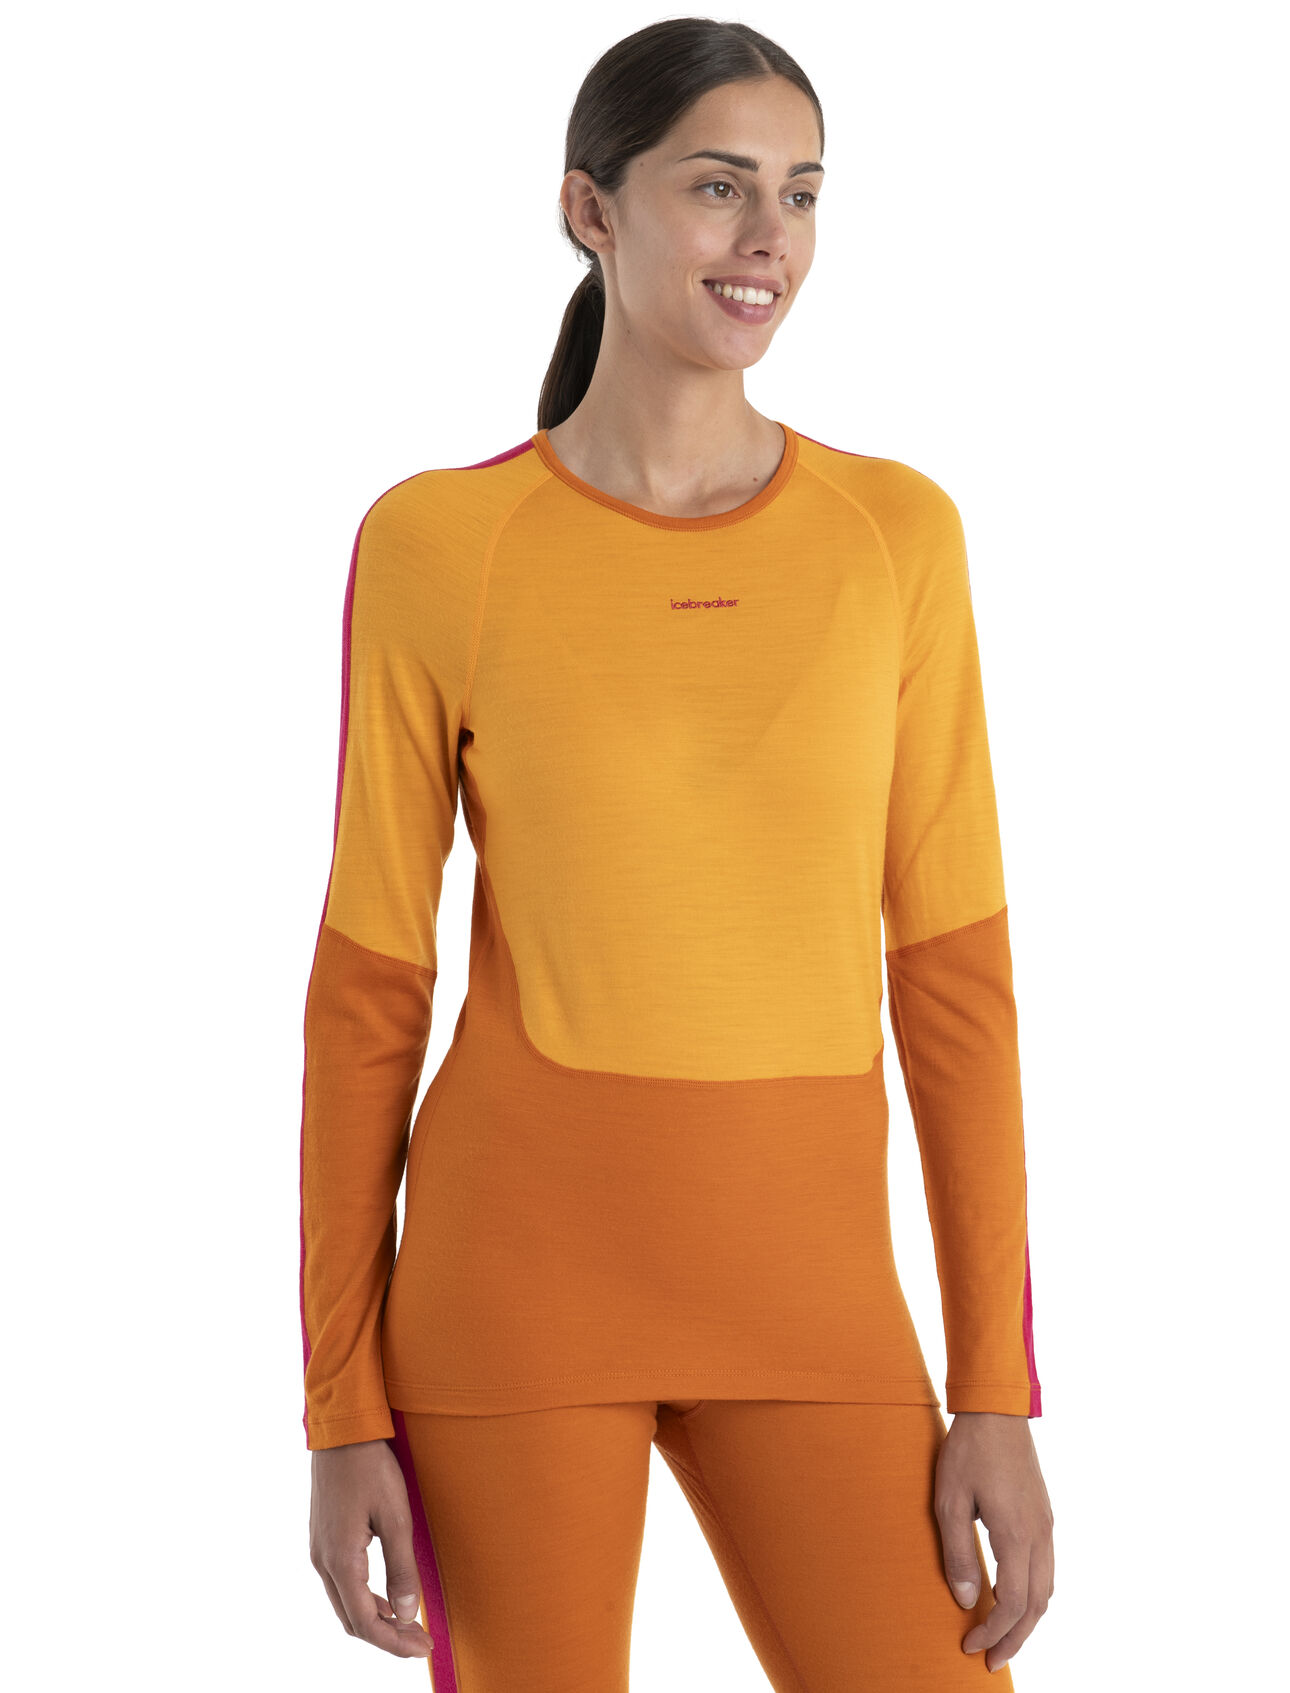 Womens Merino 200 Sonebula Long Sleeve Thermal Top Featuring our most versatile merino jersey fabric, the 200 Sonebula Long Sleeve Crewe is a technical base layer that provides ample warmth whatever the activity.